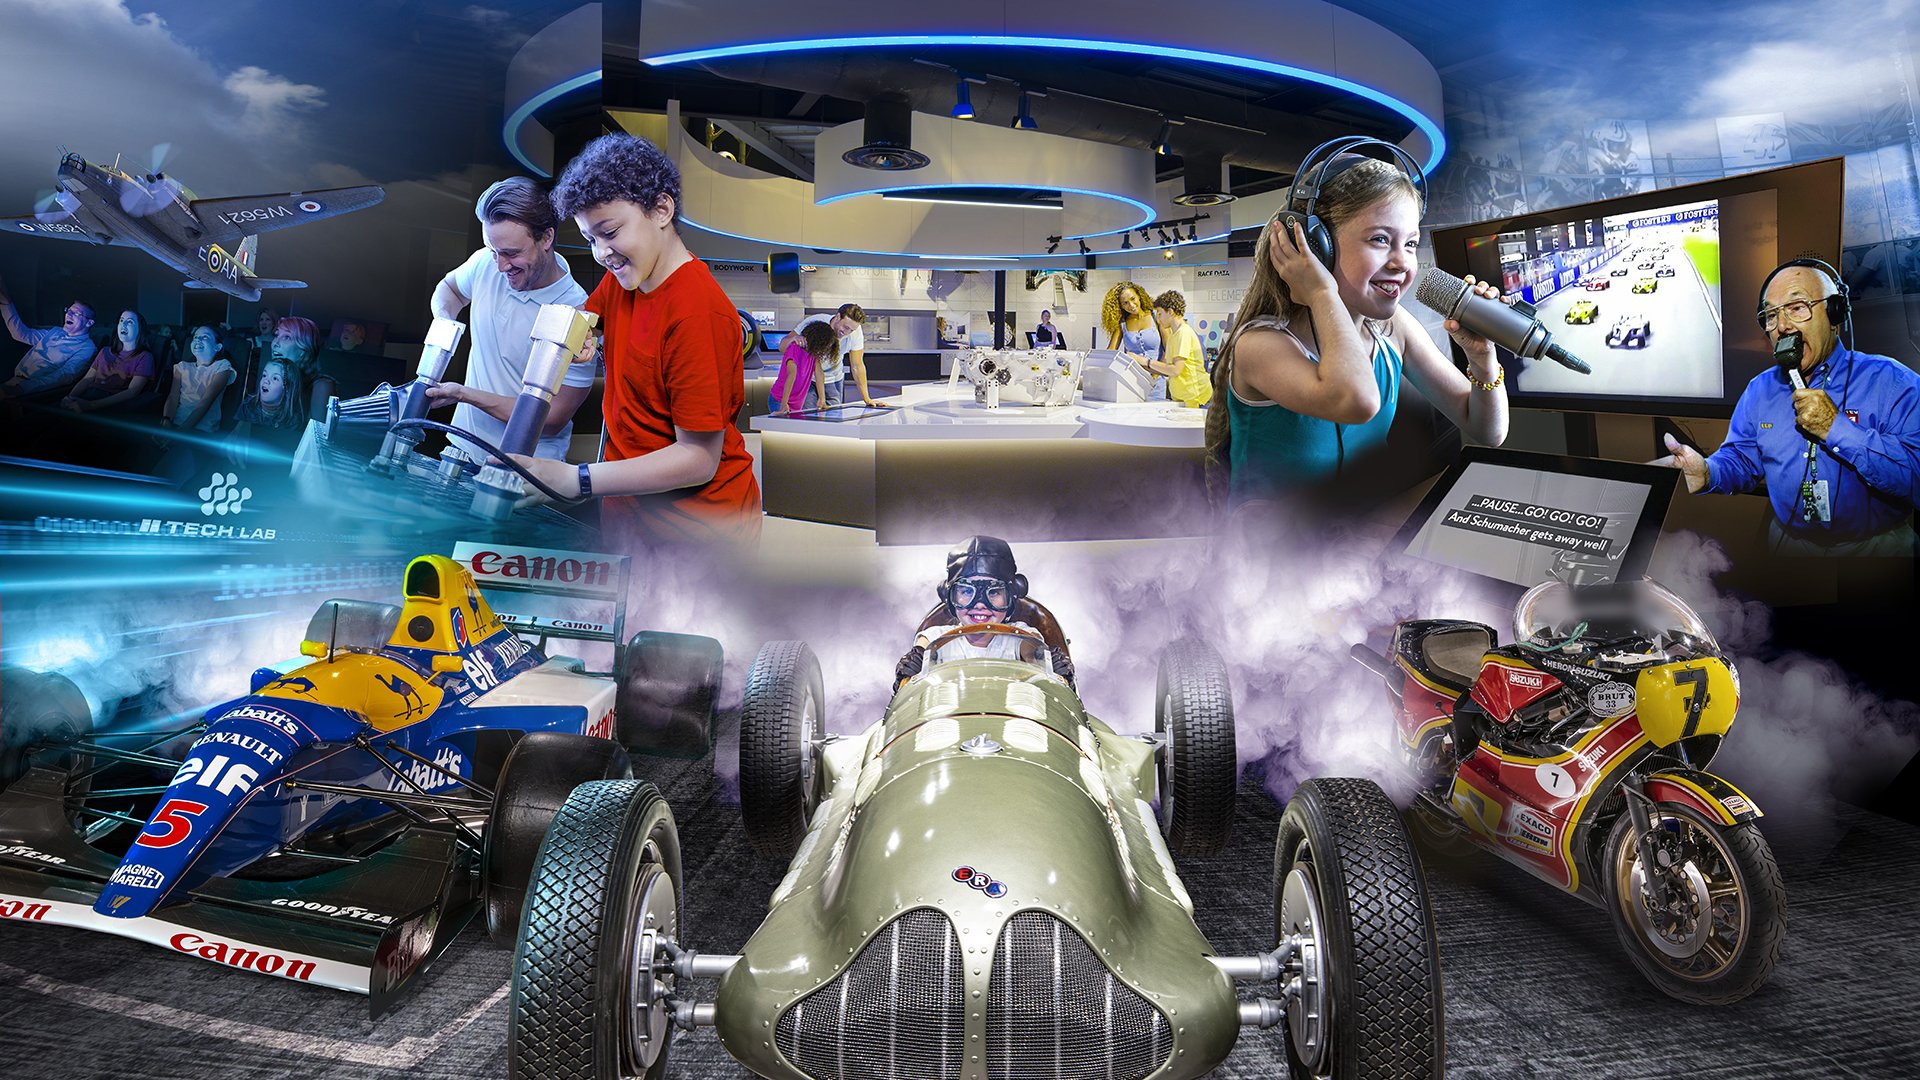 The Silverstone Interactive Museum Top Image